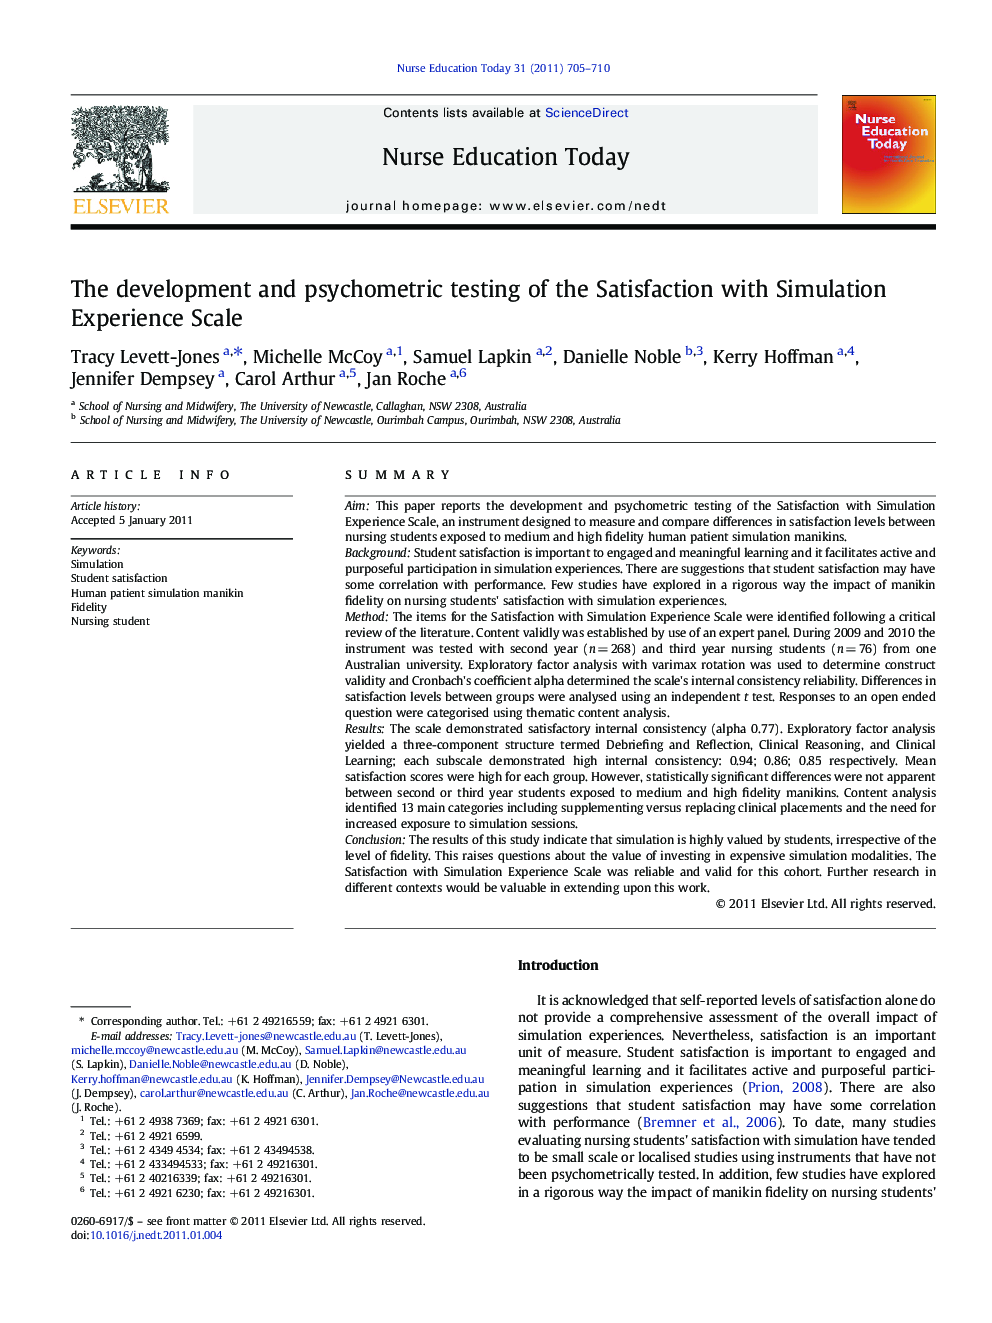 The development and psychometric testing of the Satisfaction with Simulation Experience Scale